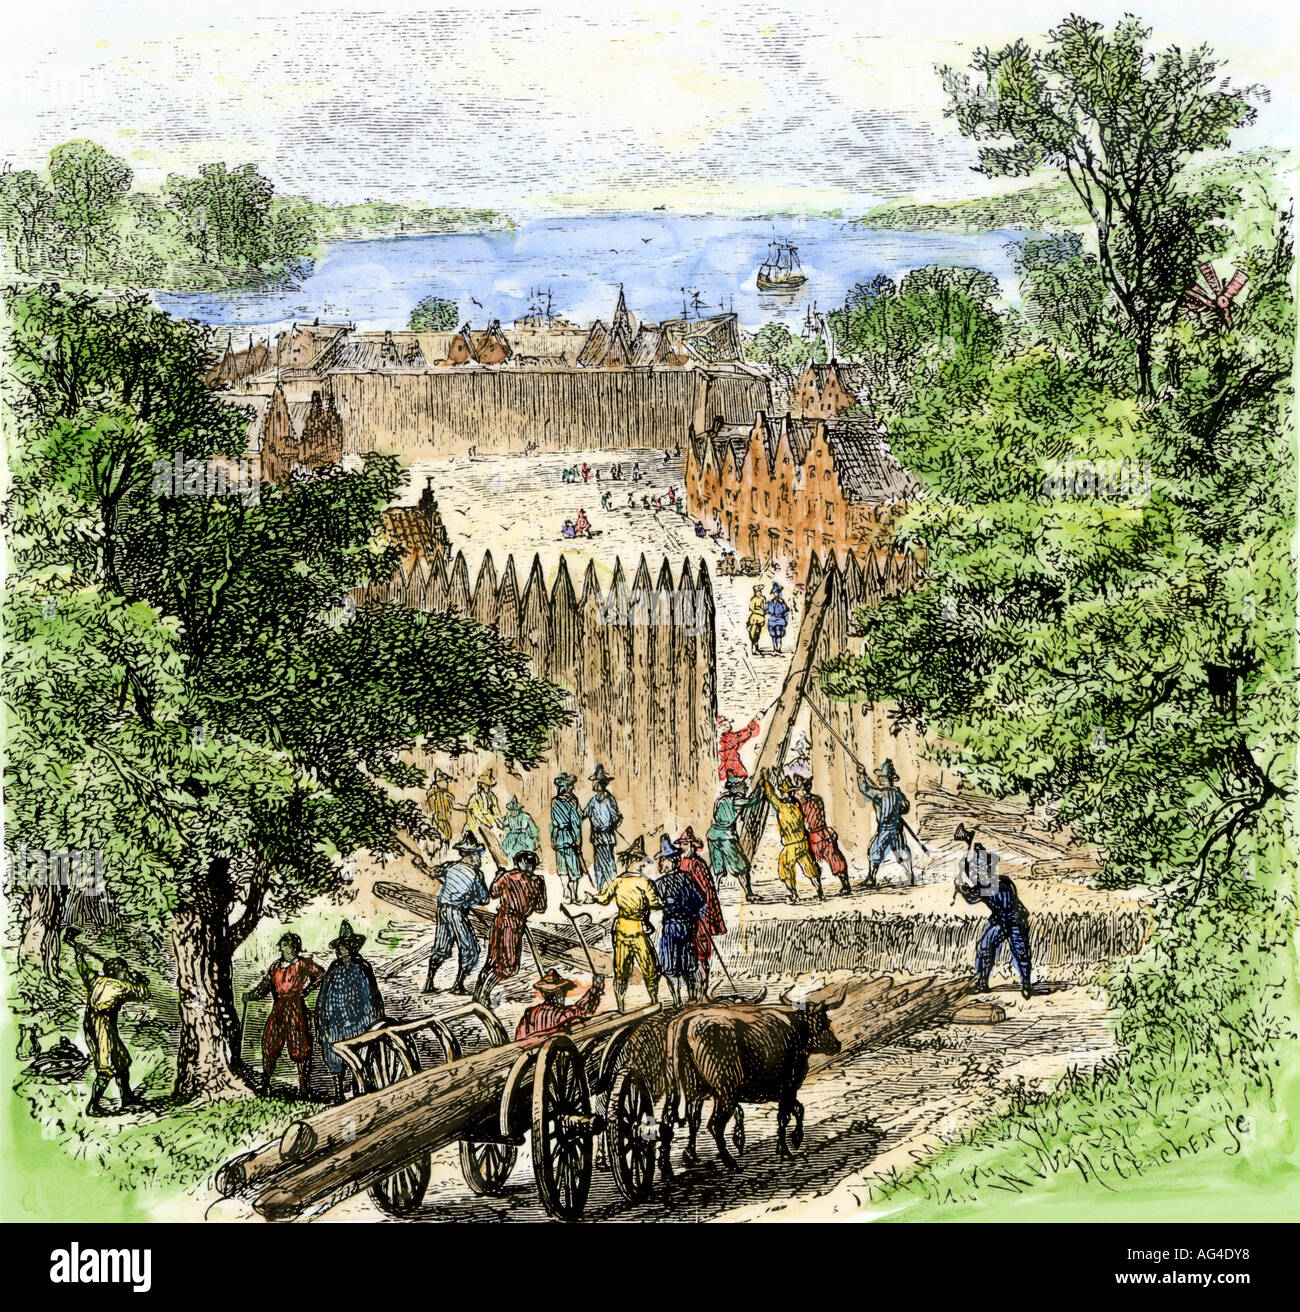 Dutch colonists building the perimeter stockade on Manhattan Island which became Wall Street New Amsterdam 1650s. Hand-colored woodcut Stock Photo